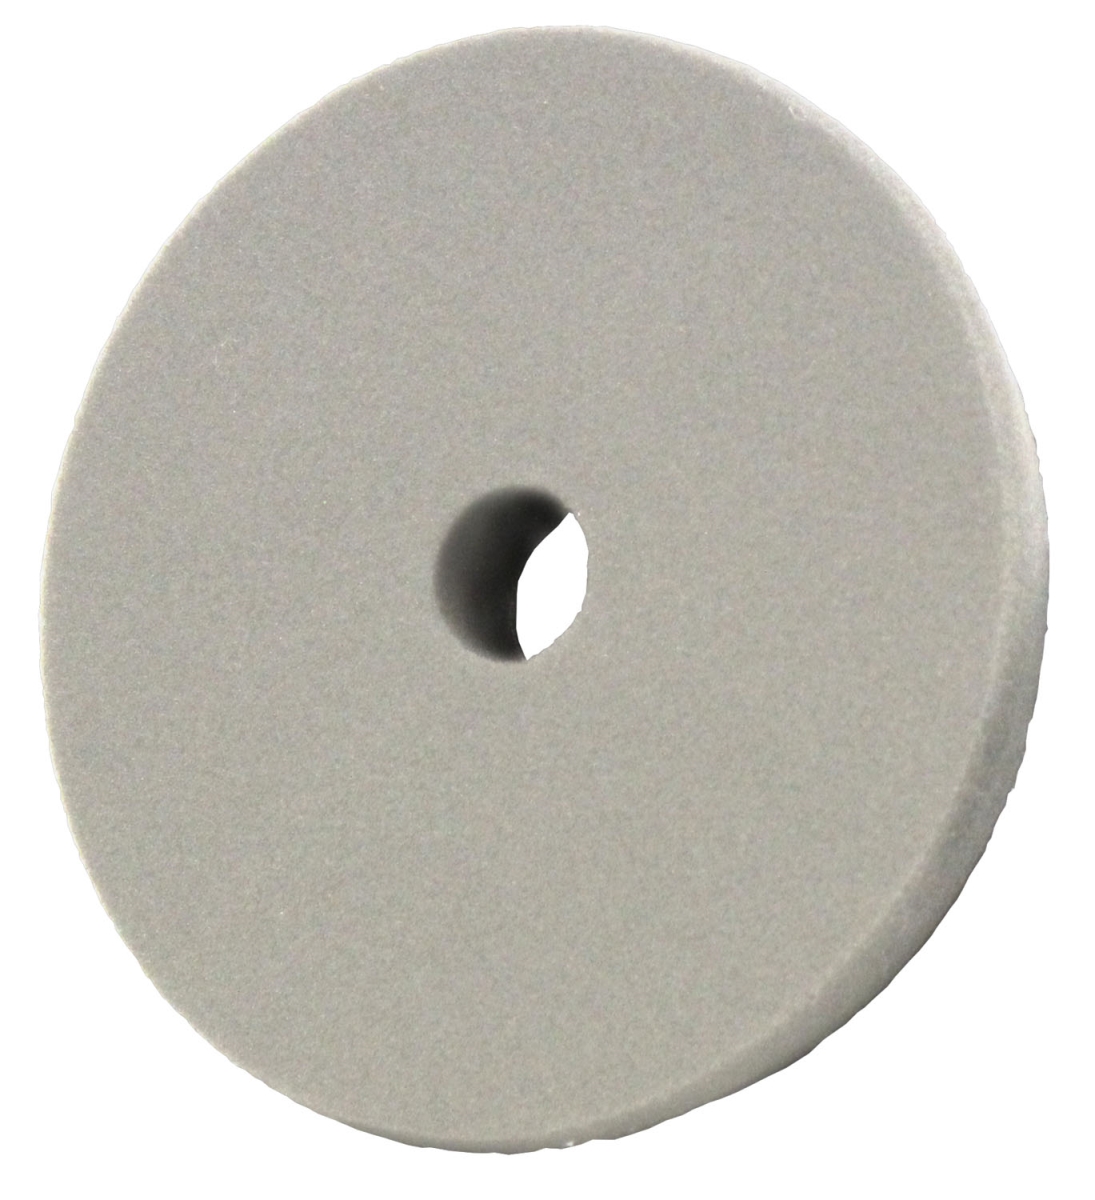 Pst-890180 Pace 3 In. Grey Foam Heavy Cut Pad - Pack Of 4